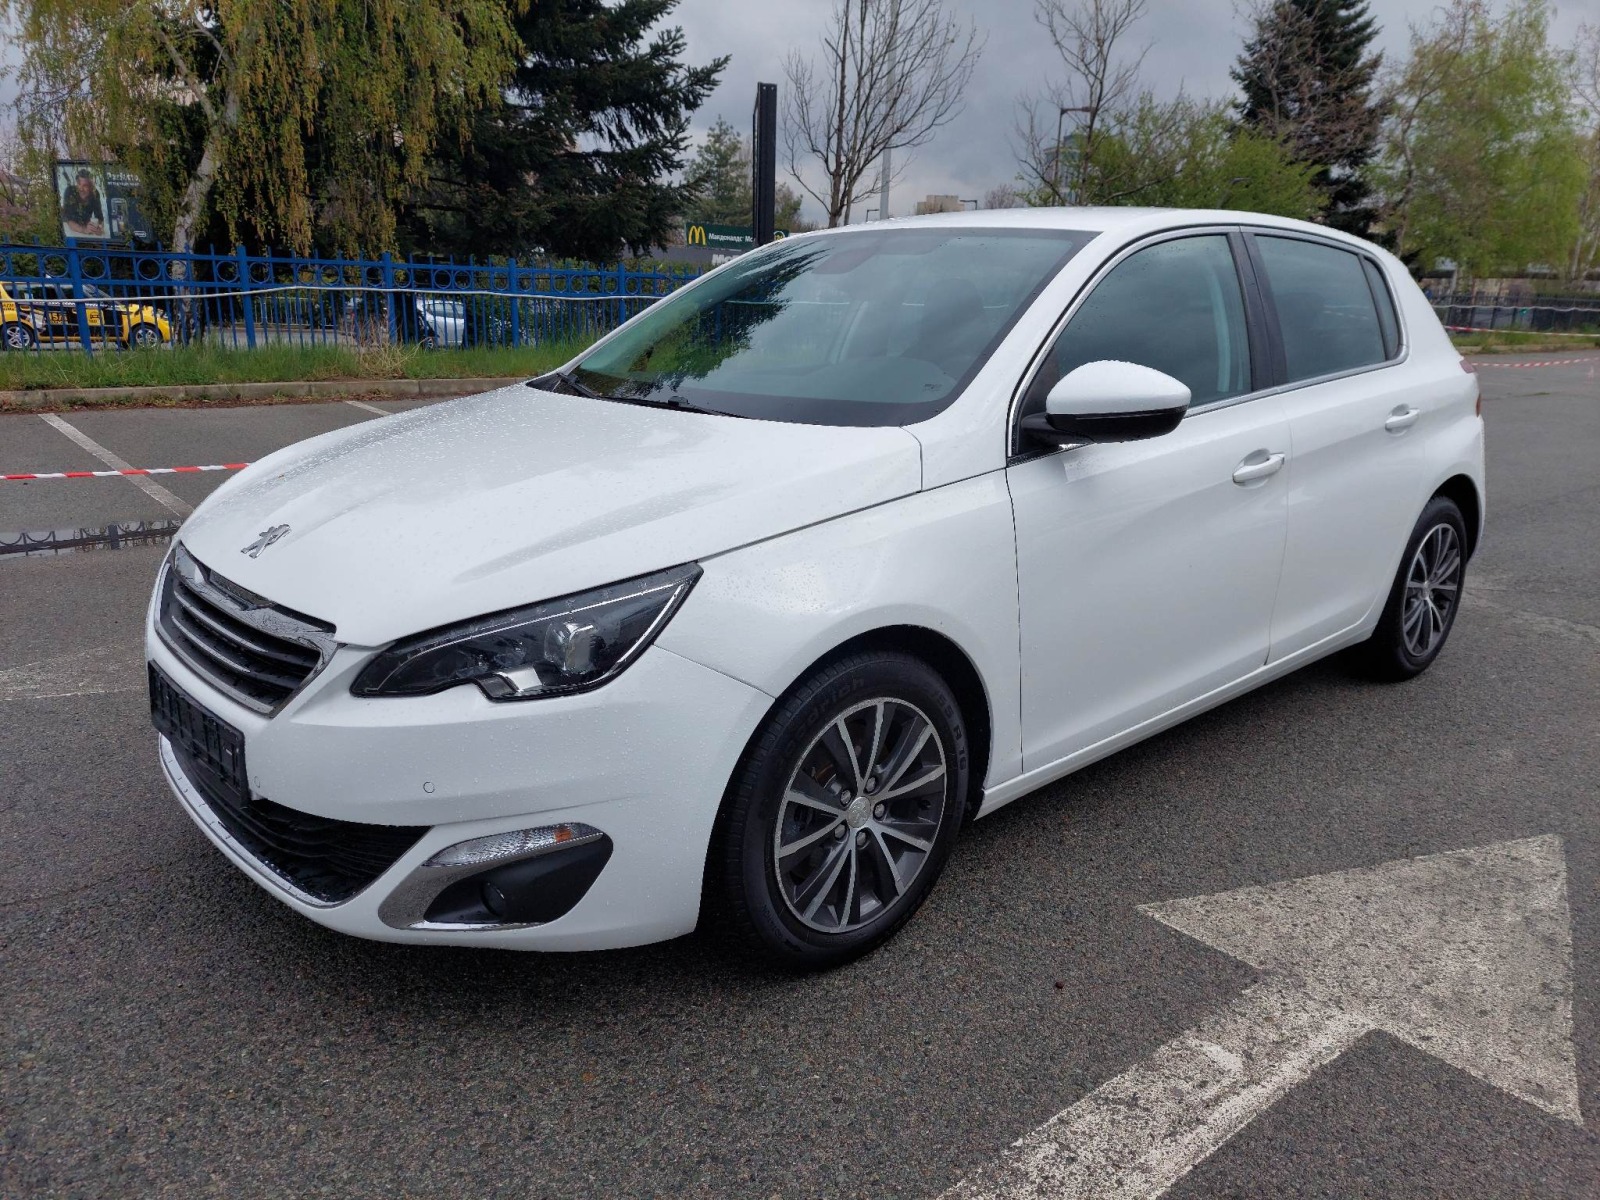 Peugeot 308 ALLURE 2,0HDI 150ps AUTOMATIC - [1] 